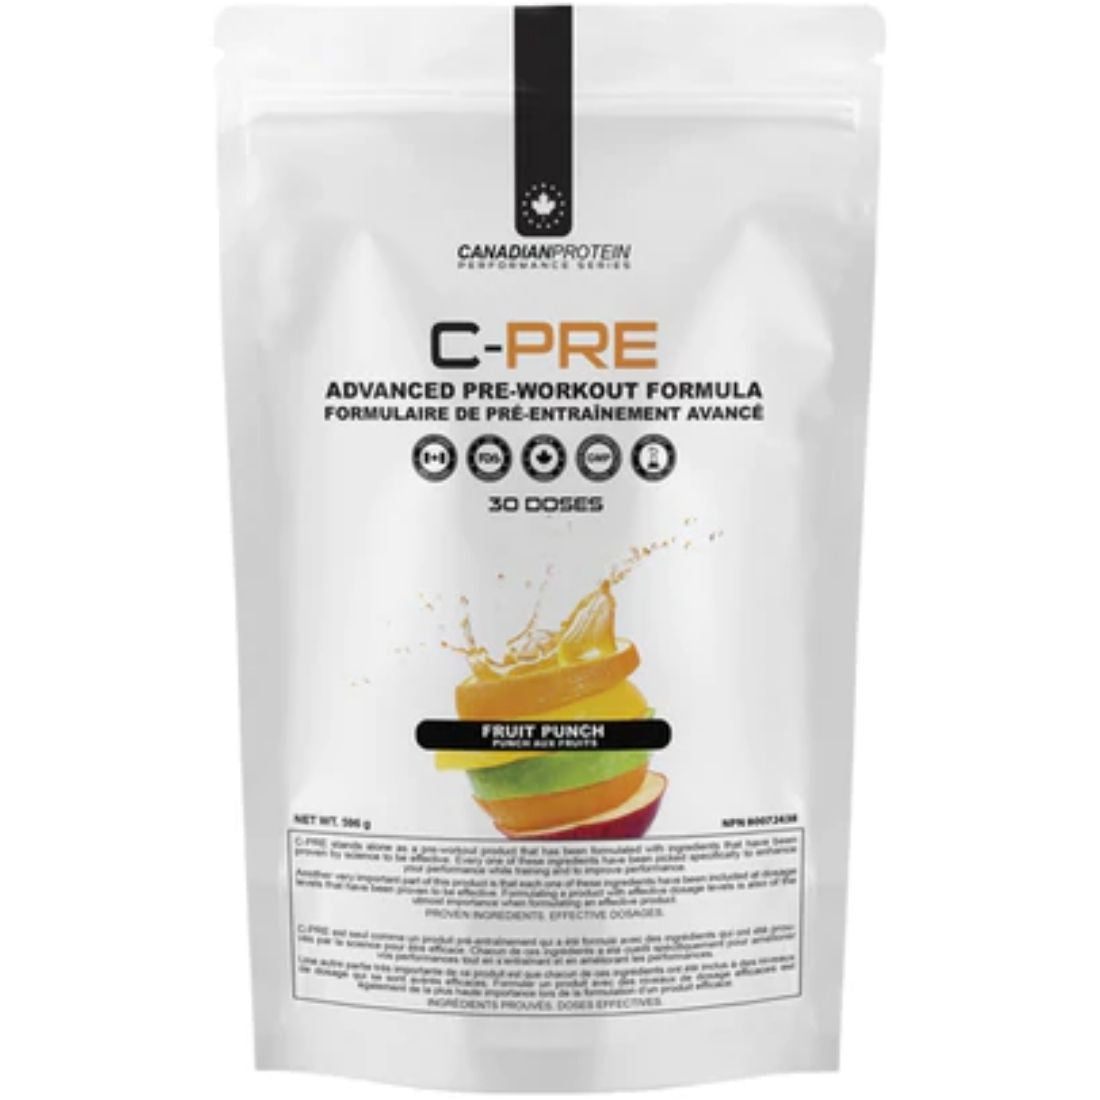 Canadian Protein C-PRE Advanced Pre-Workout Formula